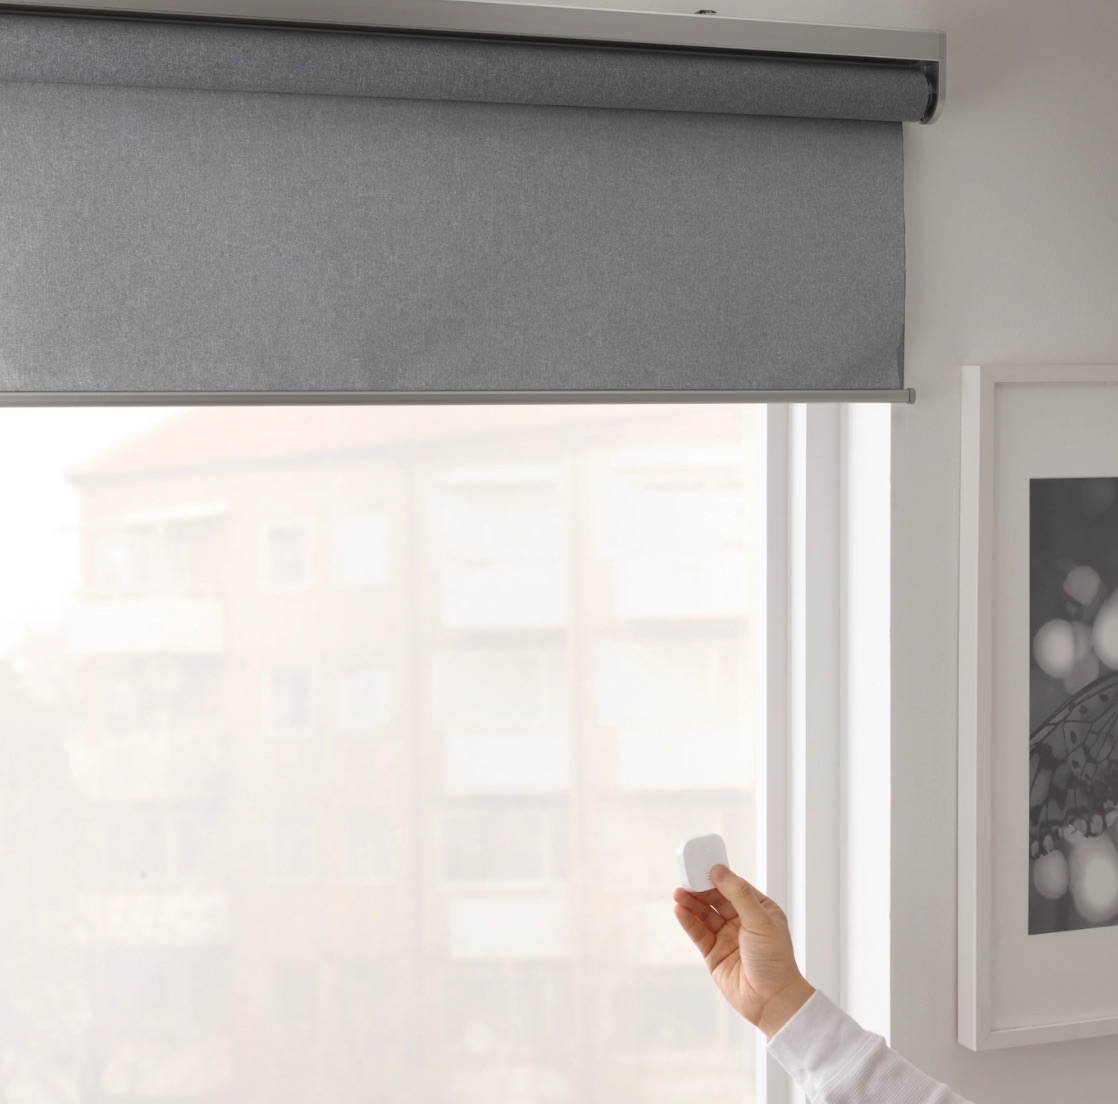 Ikea's HomeKit-Compatible Smart Shades to Hit Stores in August